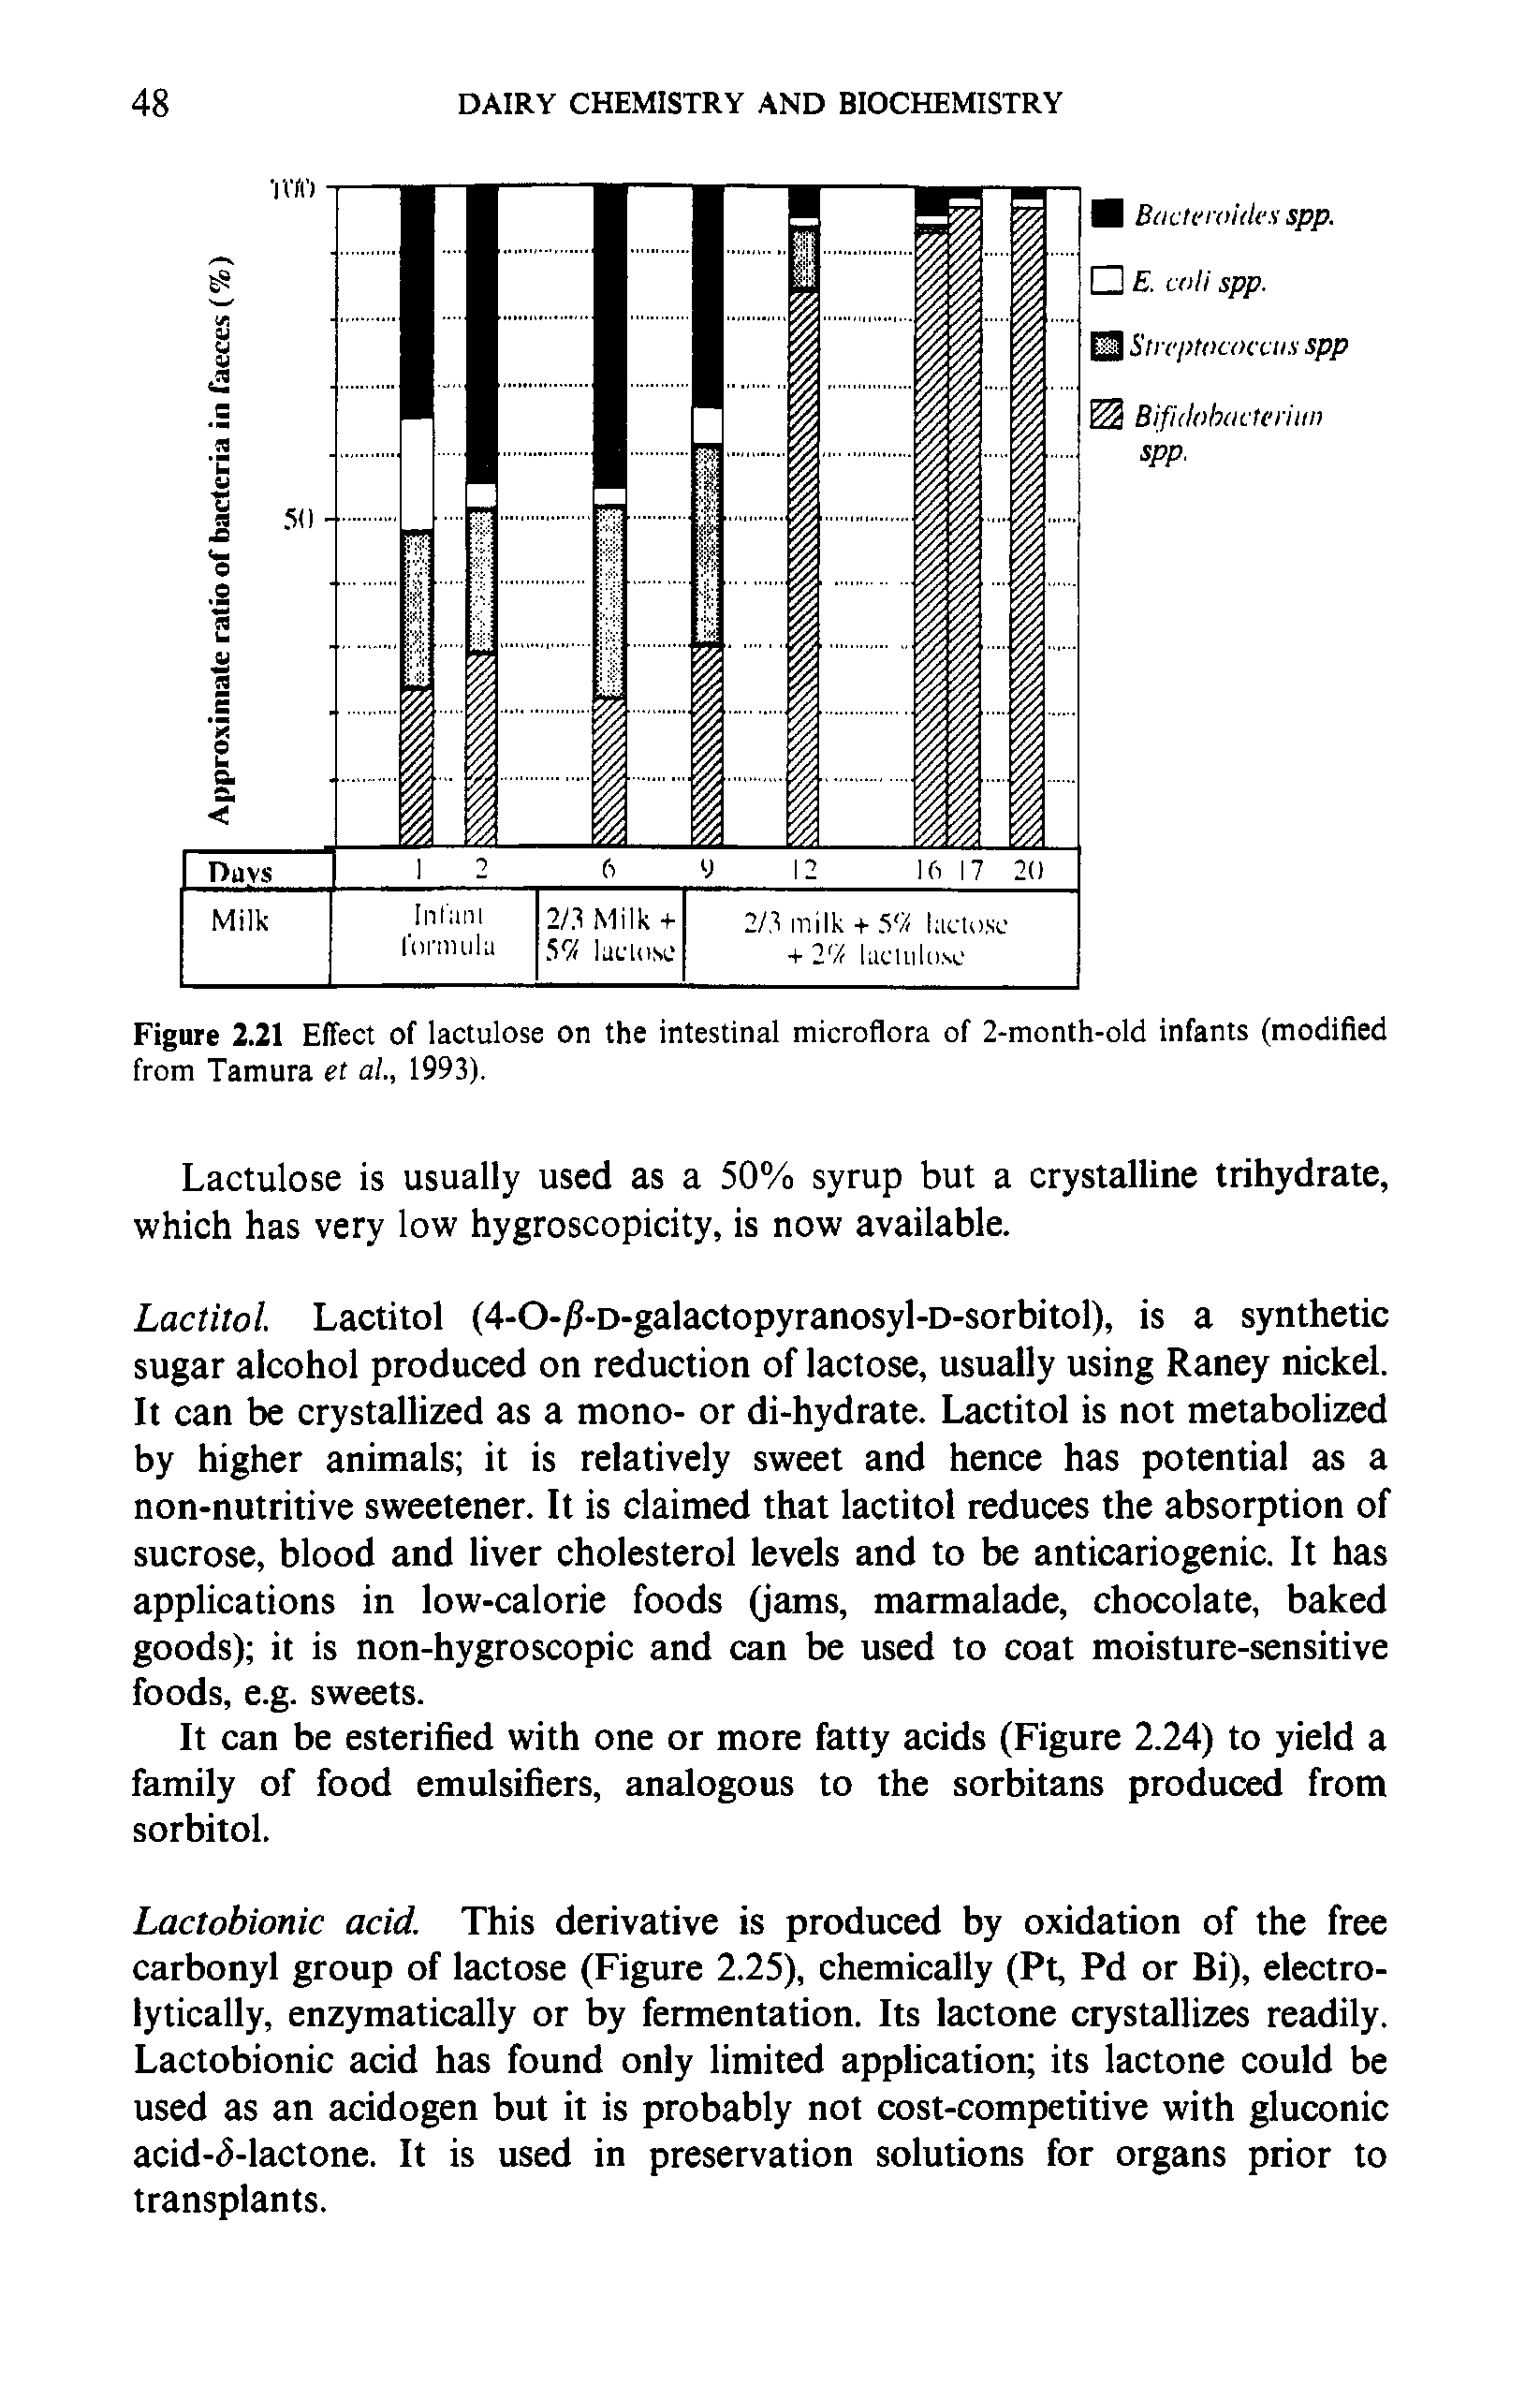 Figure 2.21 Effect of lactulose on the intestinal microflora of 2-month-old infants (modified from Tamura et al, 1993).